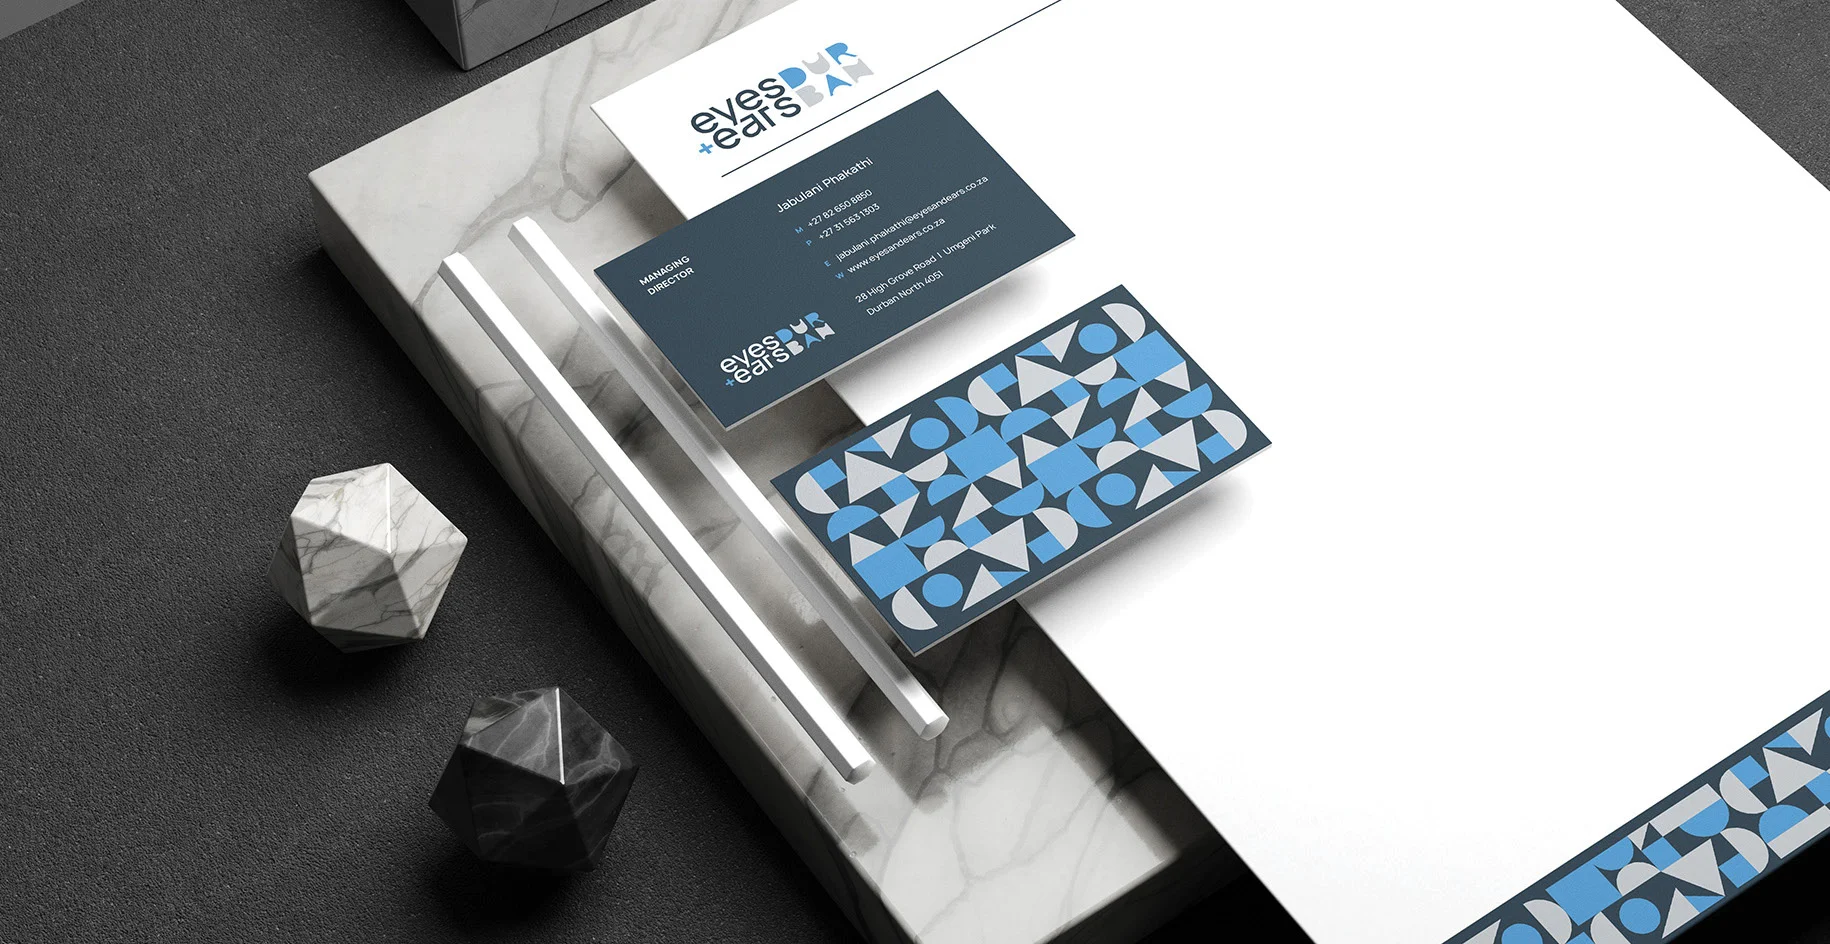 Eyes and Ears Durban Stationery Designed by The Logo Expert, one of the top-notch logo design companies in South Africa. With a portfolio of logo design clients in Cape Town, Johannesburg, Durban, and more